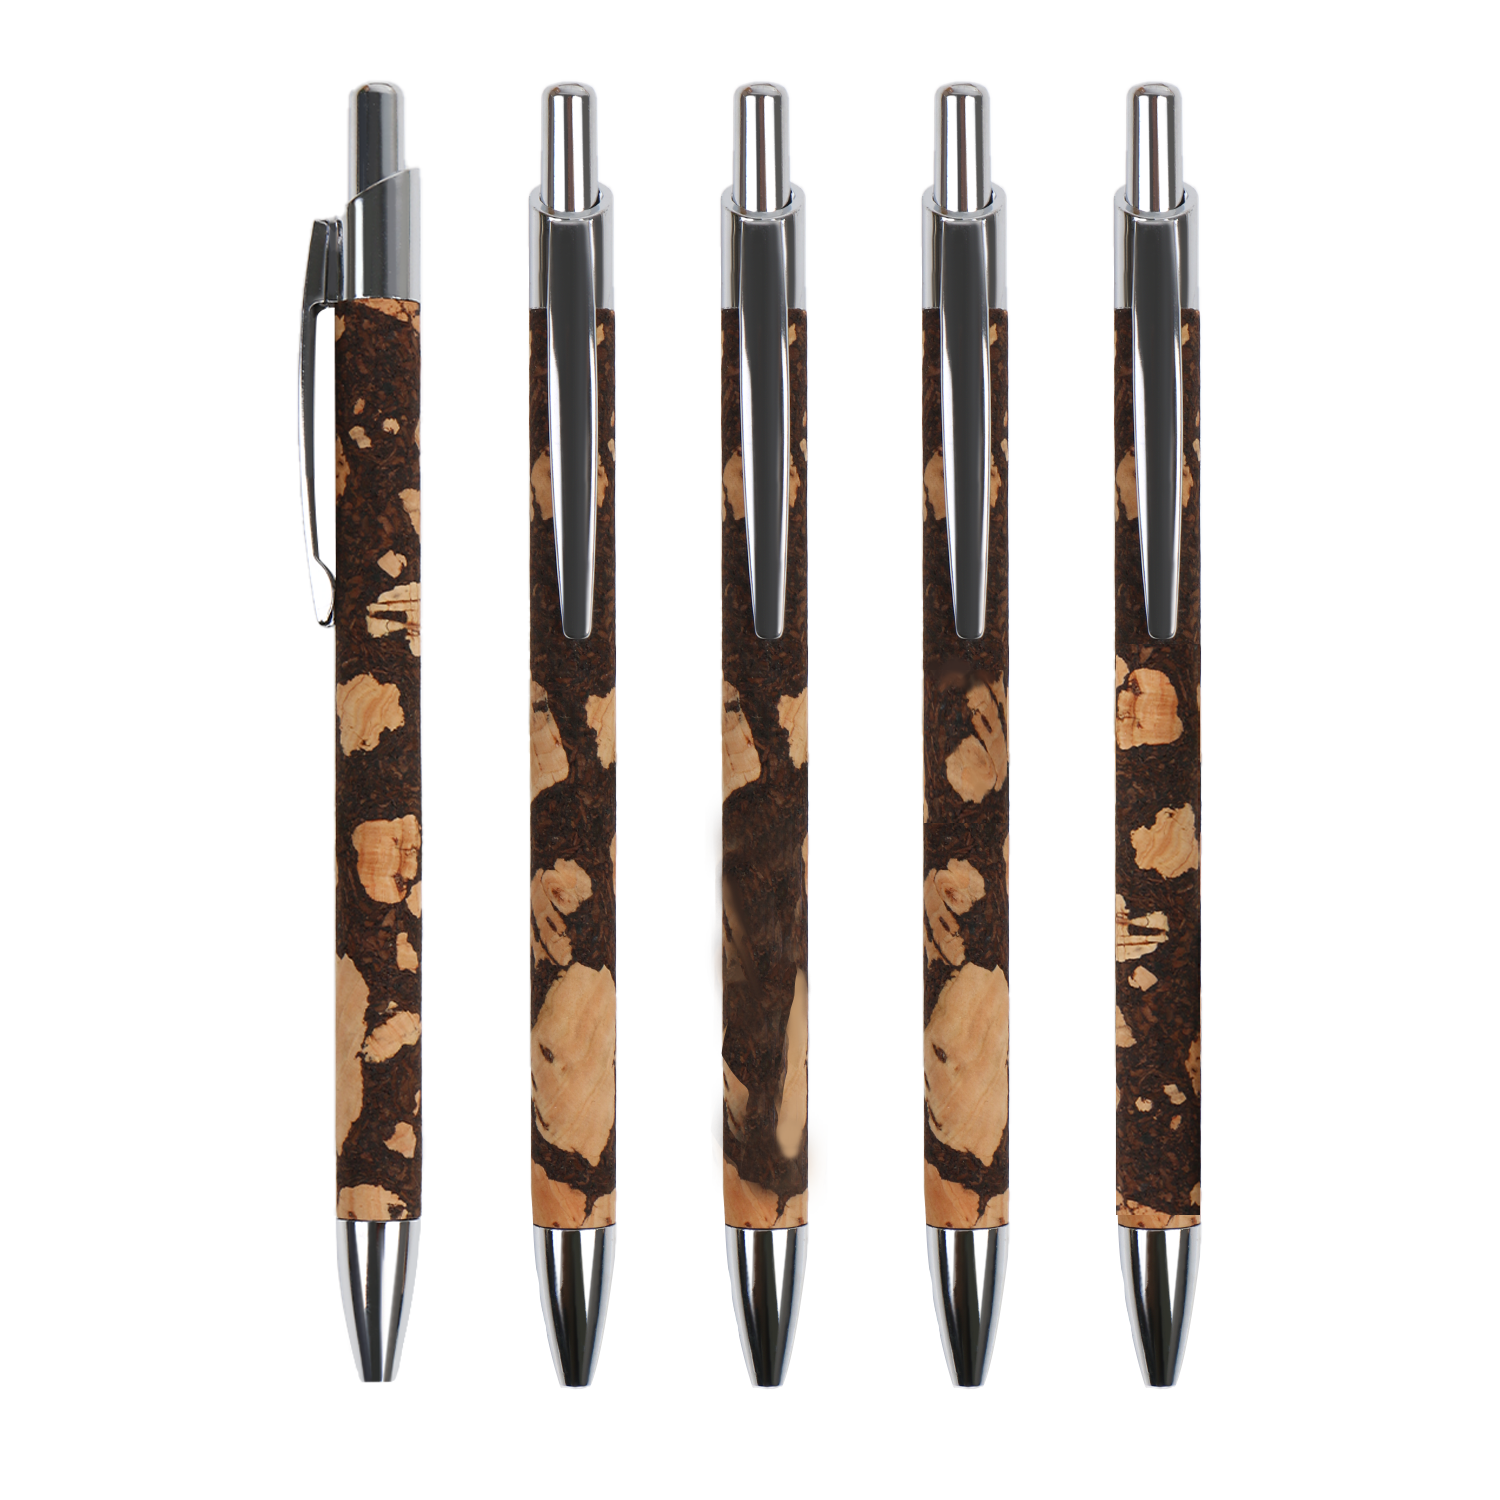 New Ecocoffee grounds cork mixed  Metal aluminum rod ball point pen